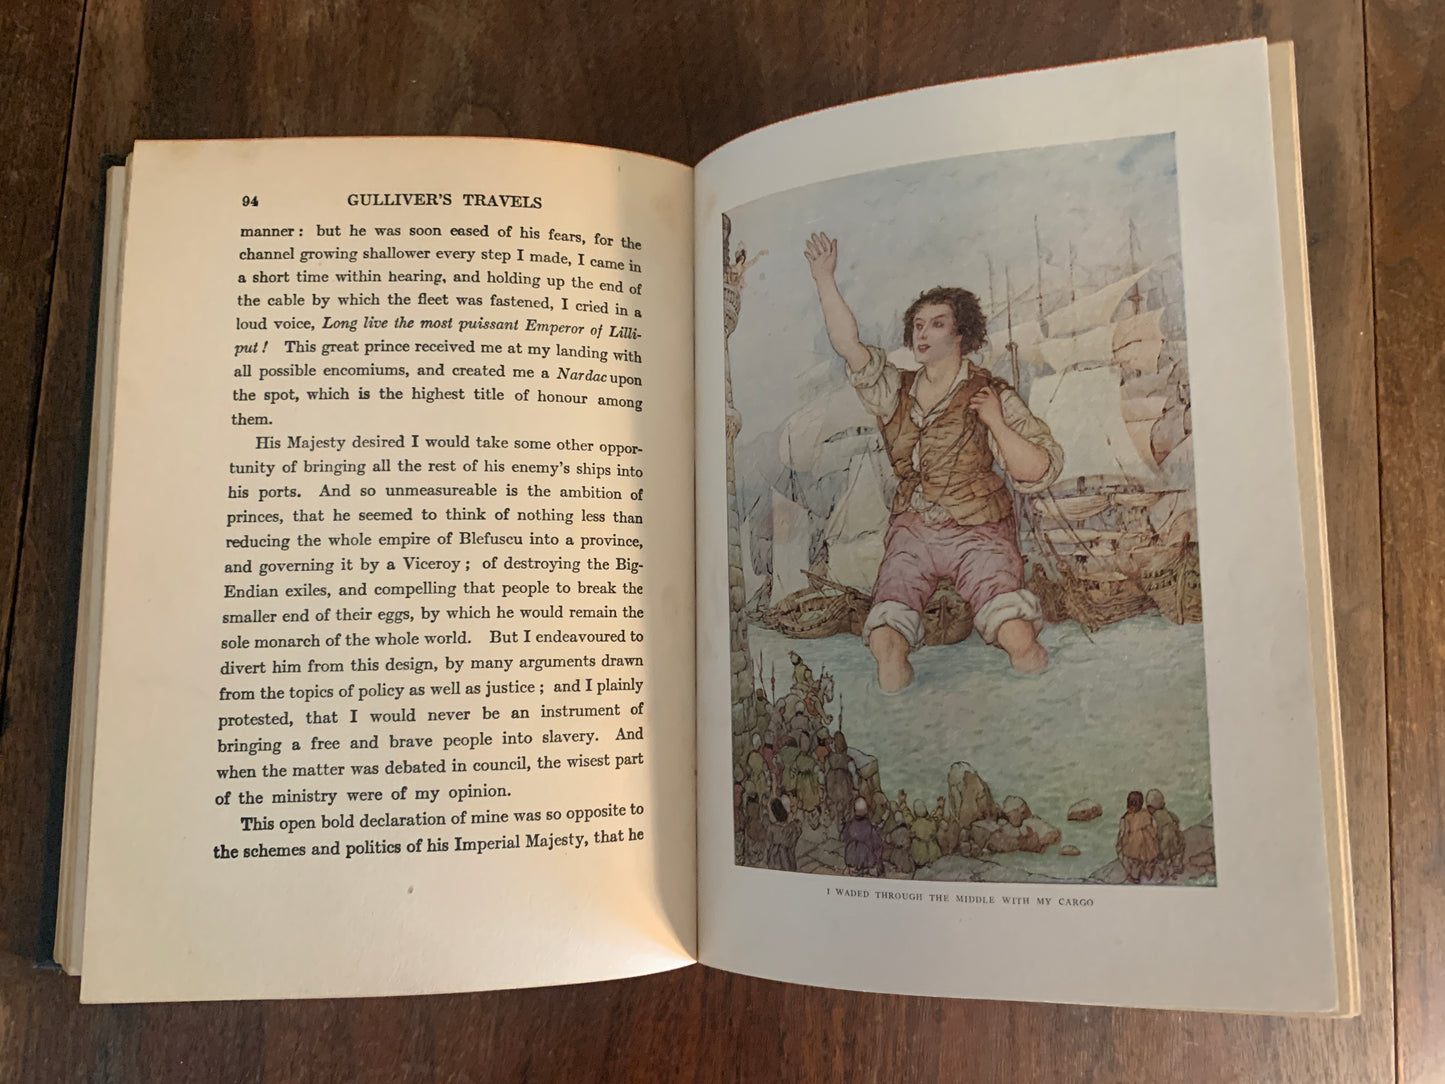 Gulliver's Travels by Jonathan Swift Illustrated by Victor Candell & R.G. Mossa